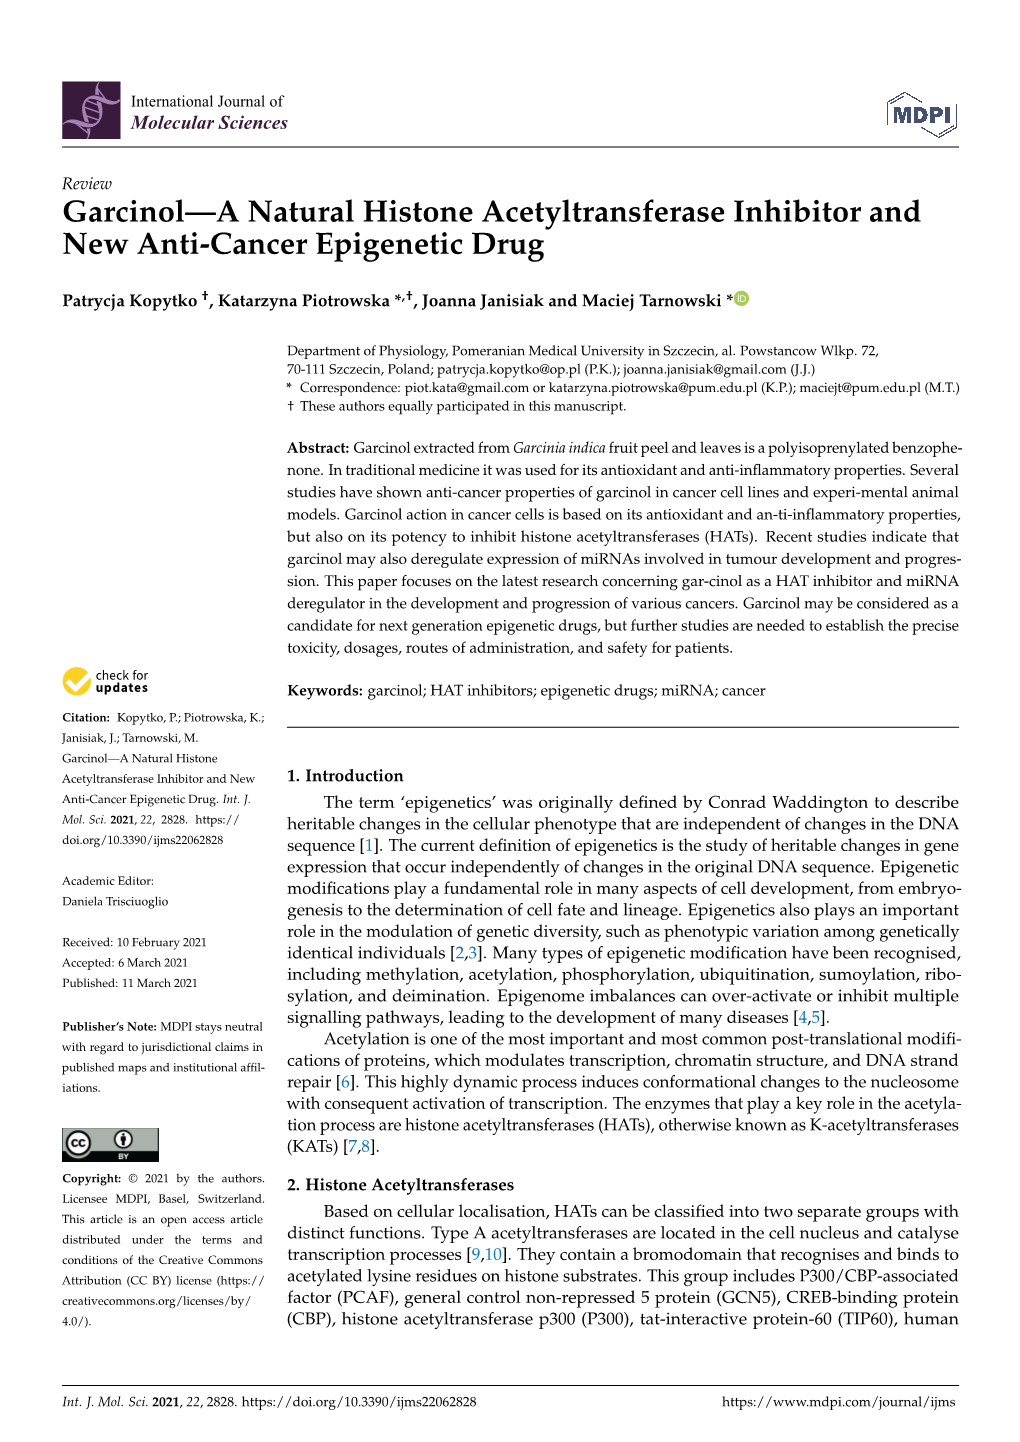 Garcinol—A Natural Histone Acetyltransferase Inhibitor and New Anti-Cancer Epigenetic Drug